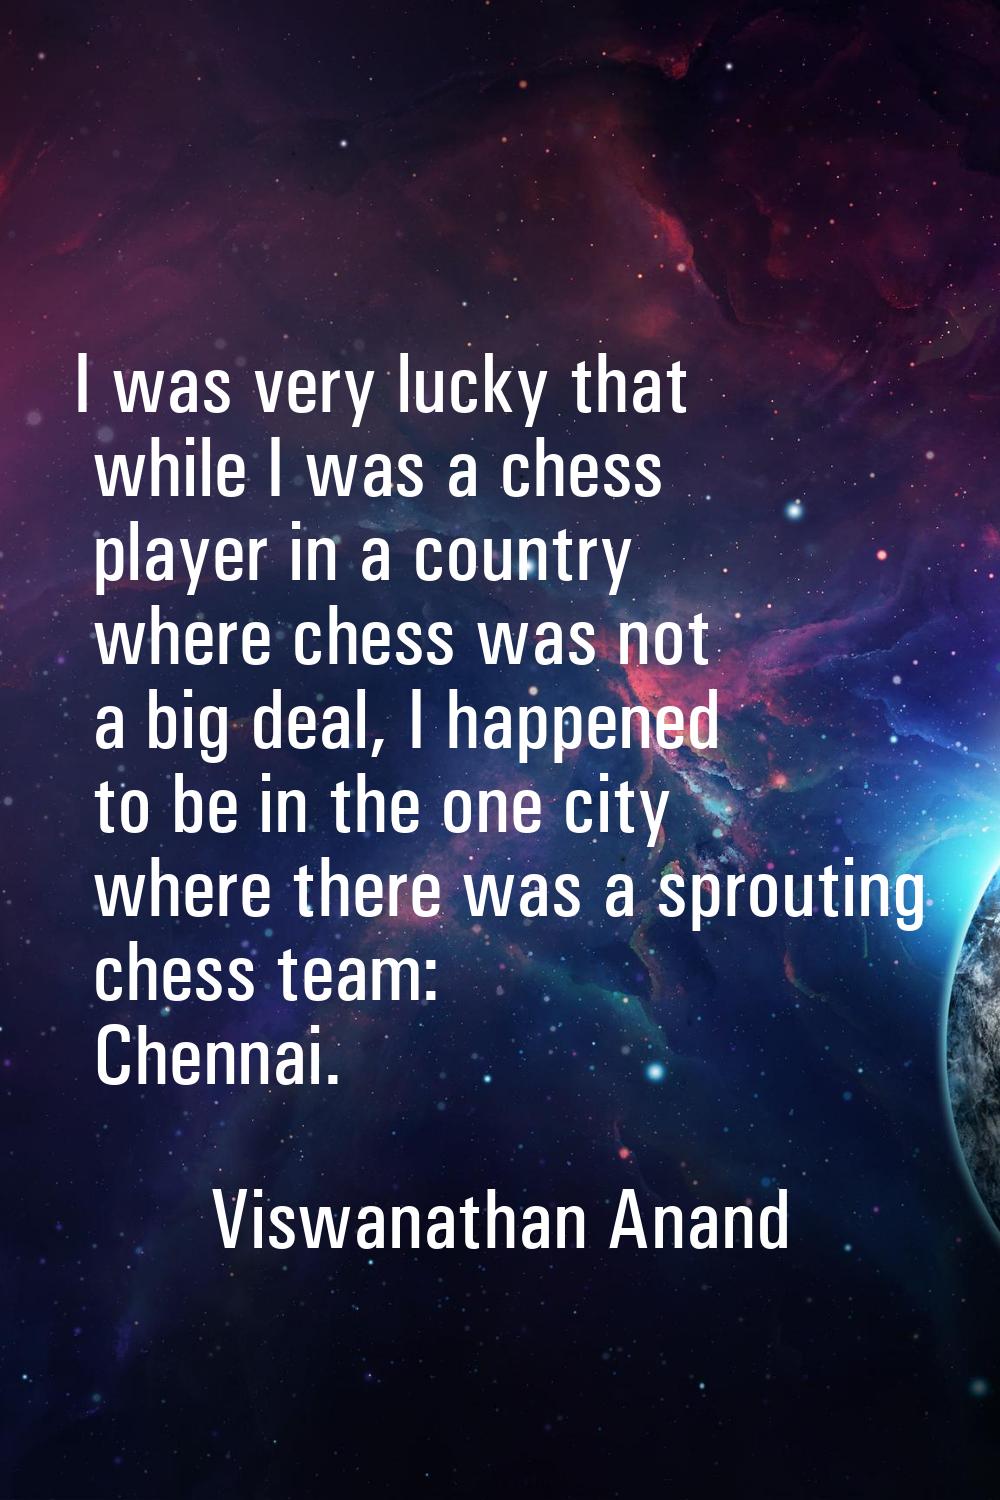 I was very lucky that while I was a chess player in a country where chess was not a big deal, I hap